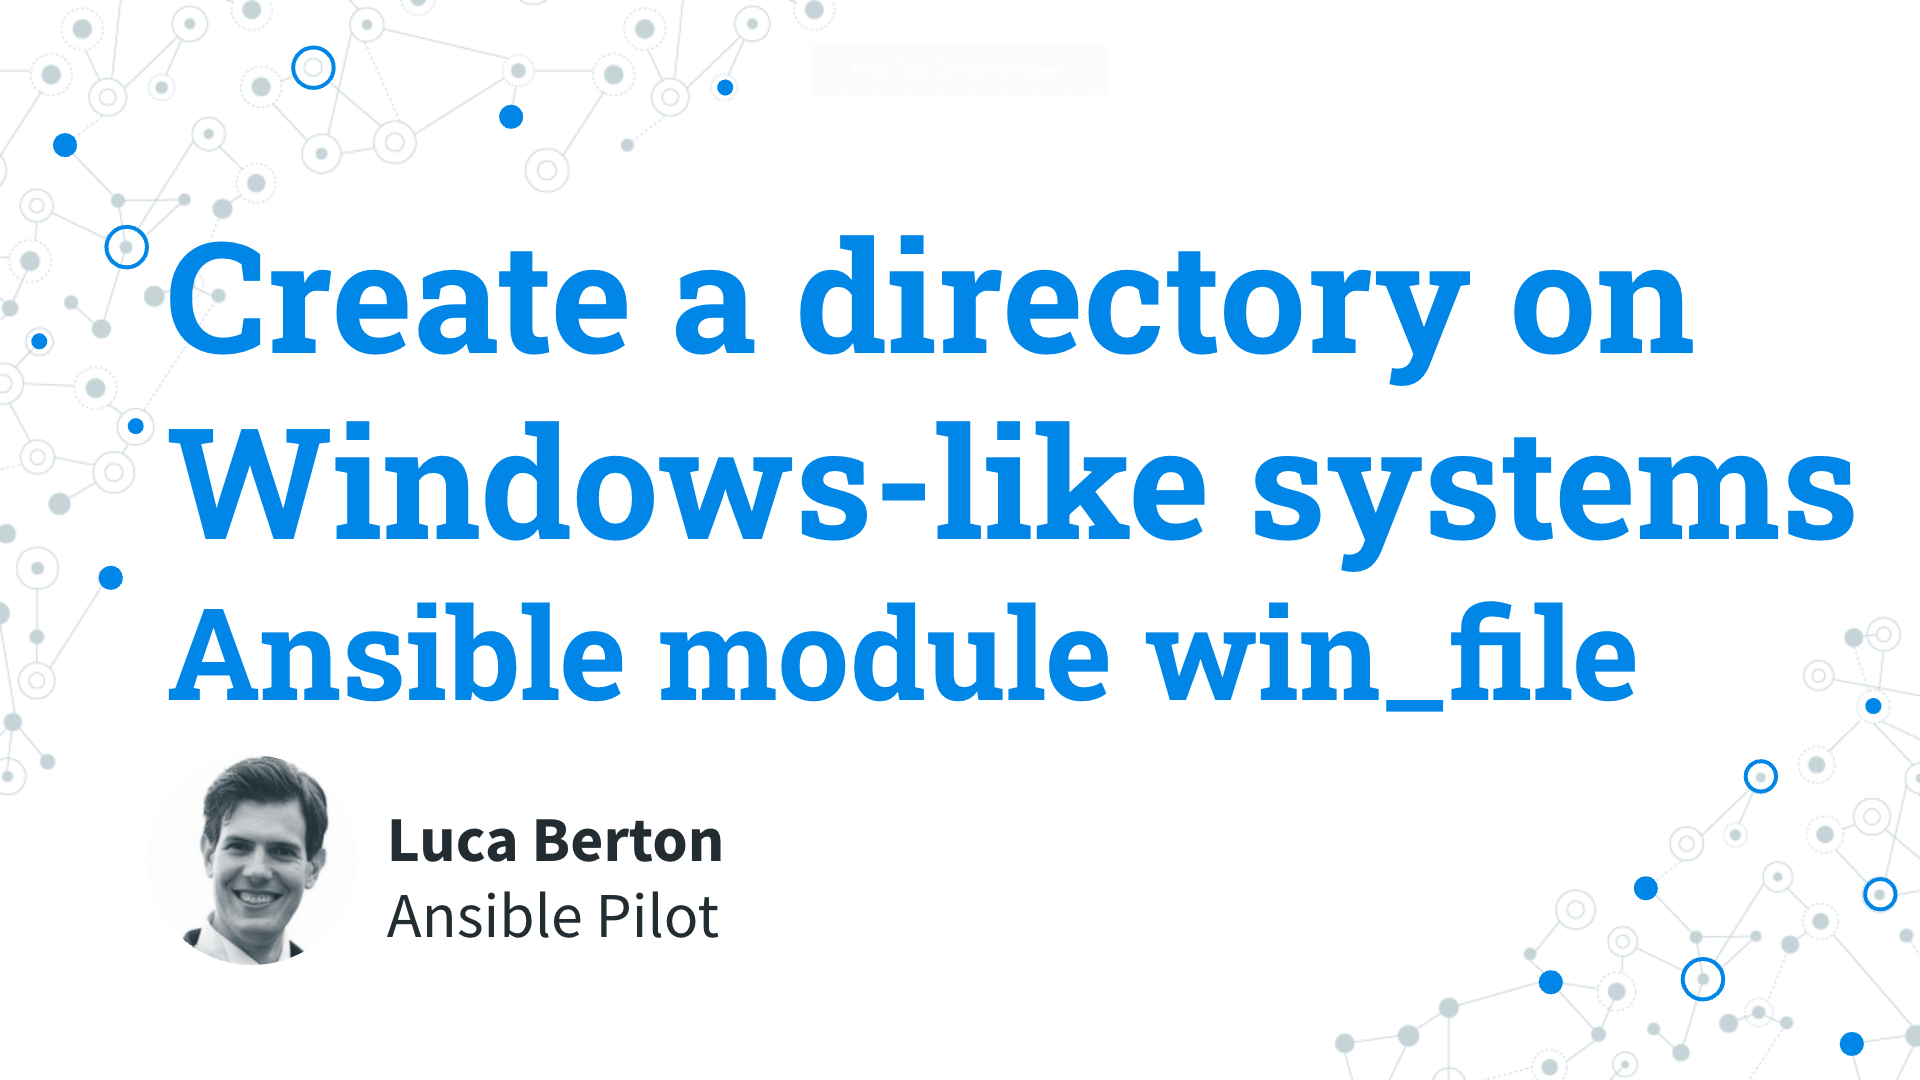 Create a directory on Windows-like systems - Ansible module win_file